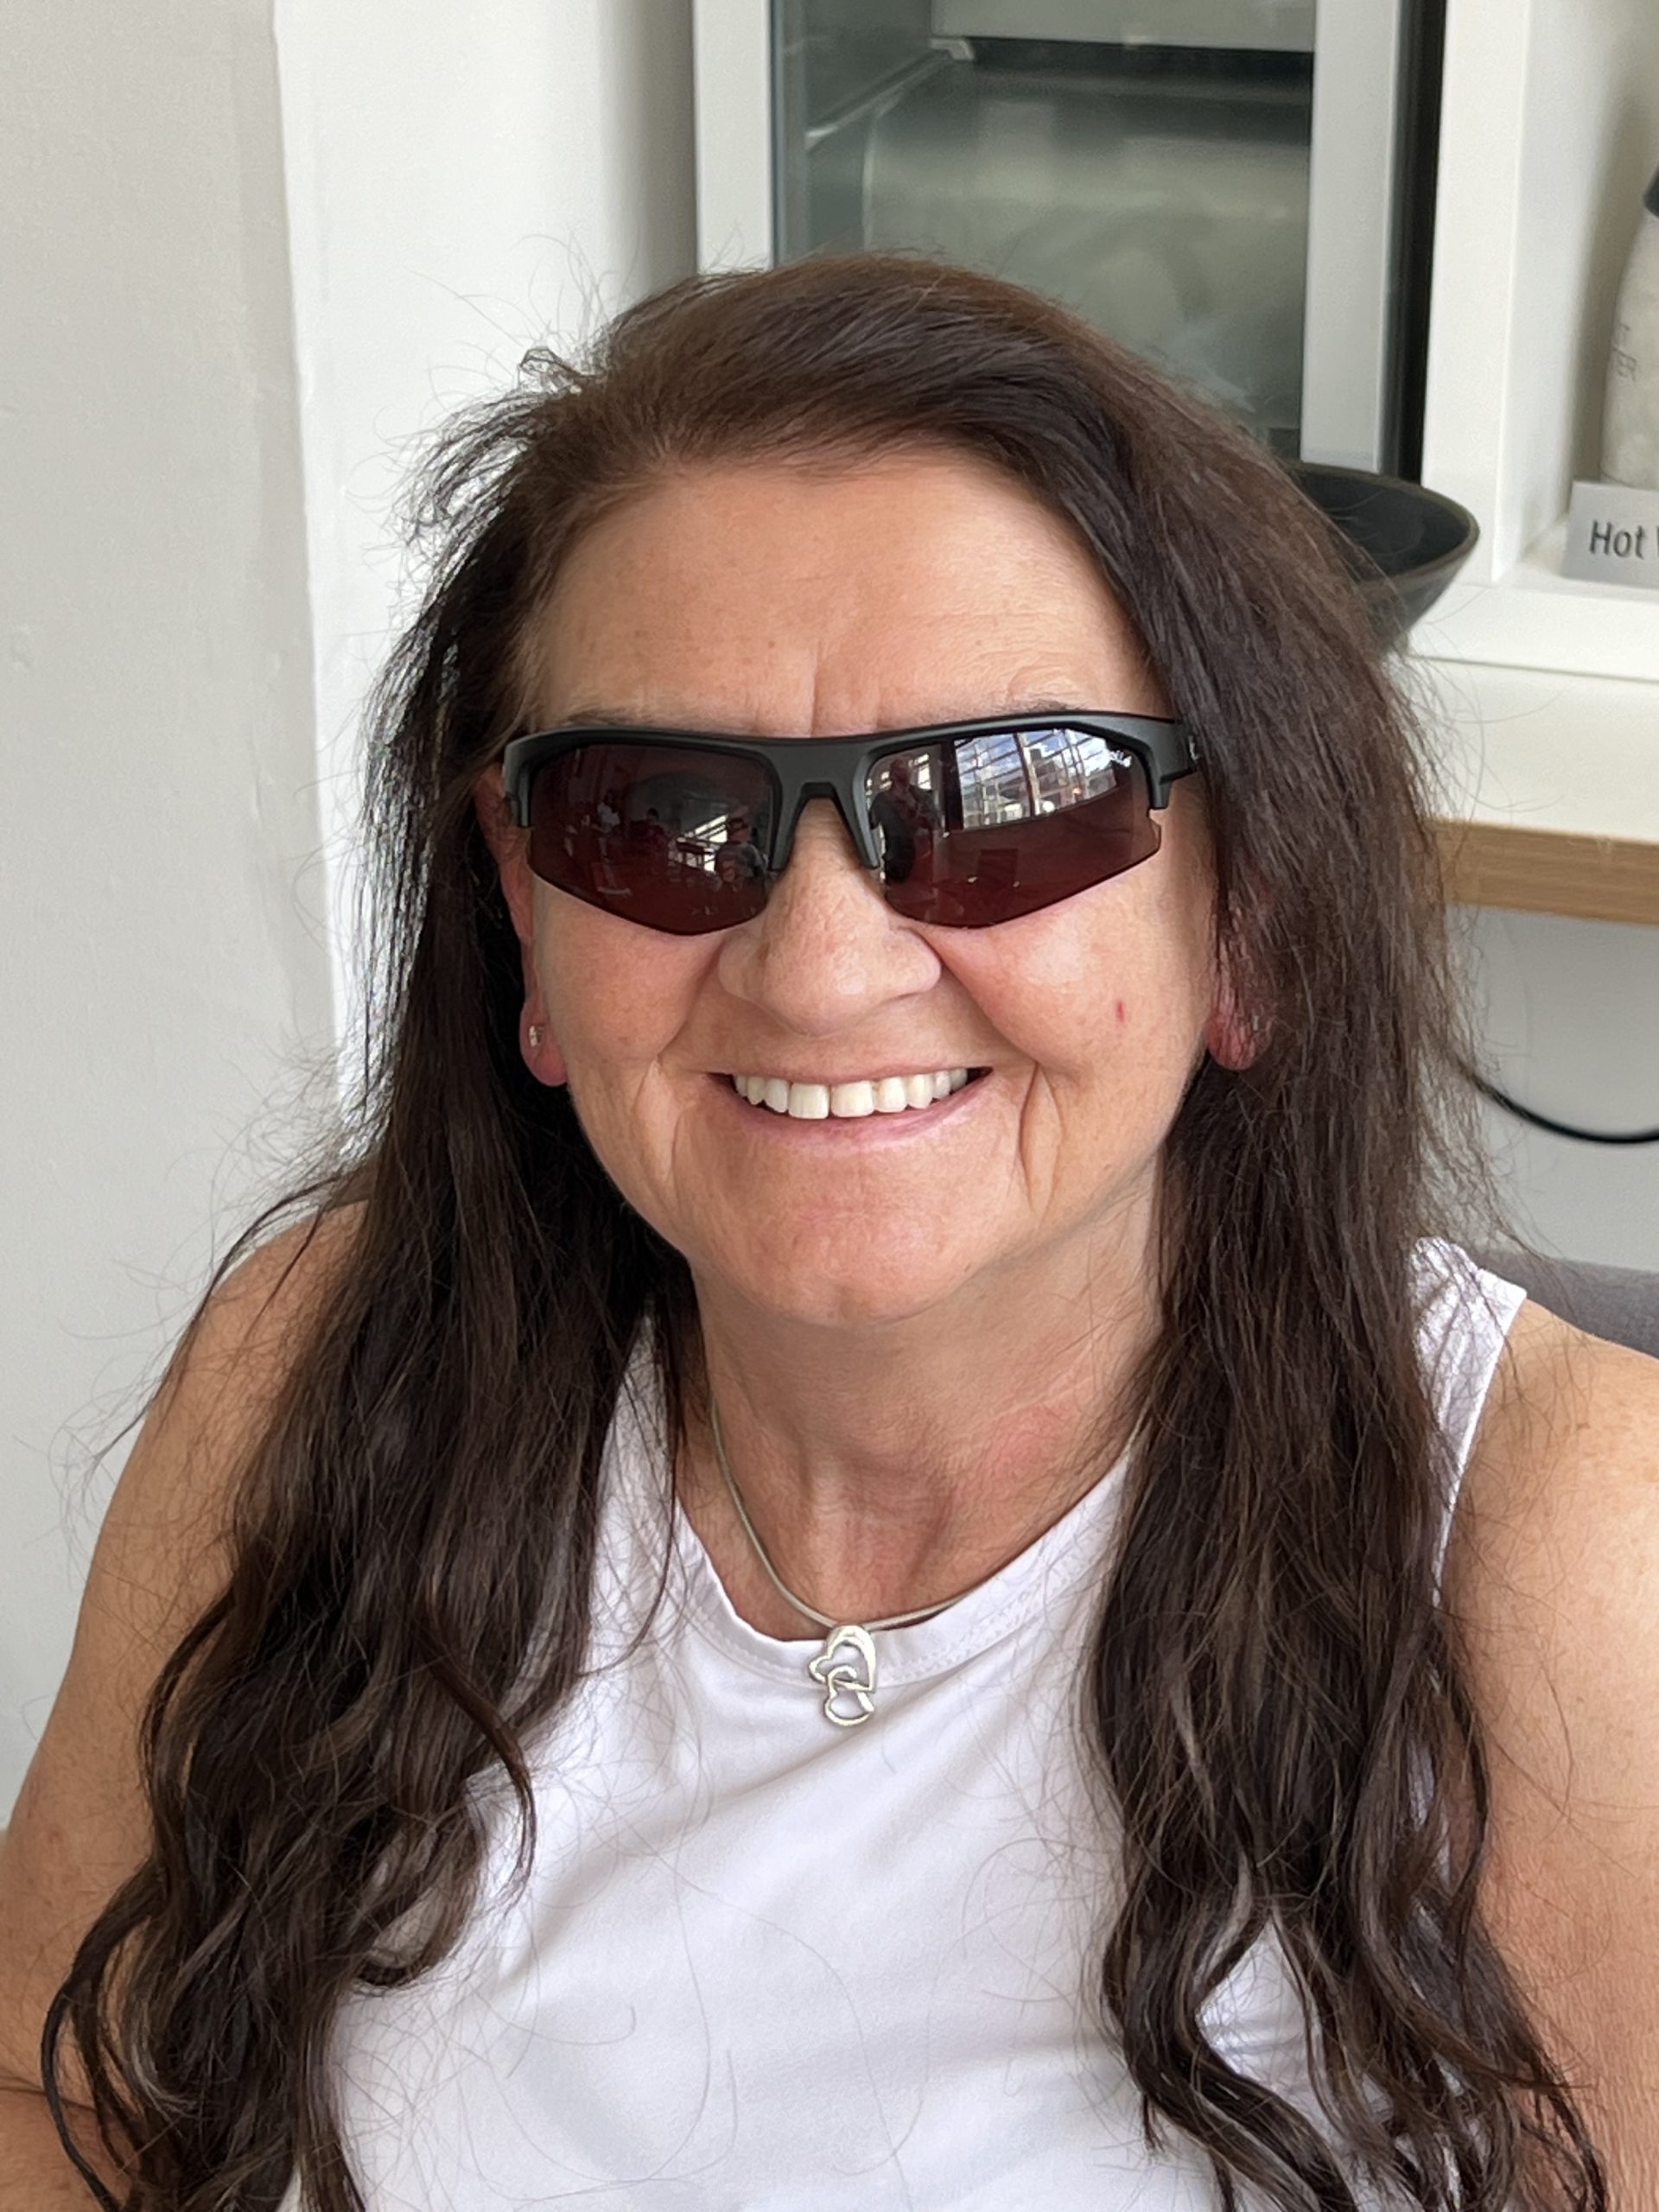 Headshot of Janiece, South Yorkshire SLC member. She has long dark hair and is wearing sunglasses. She is smiling at the camera.